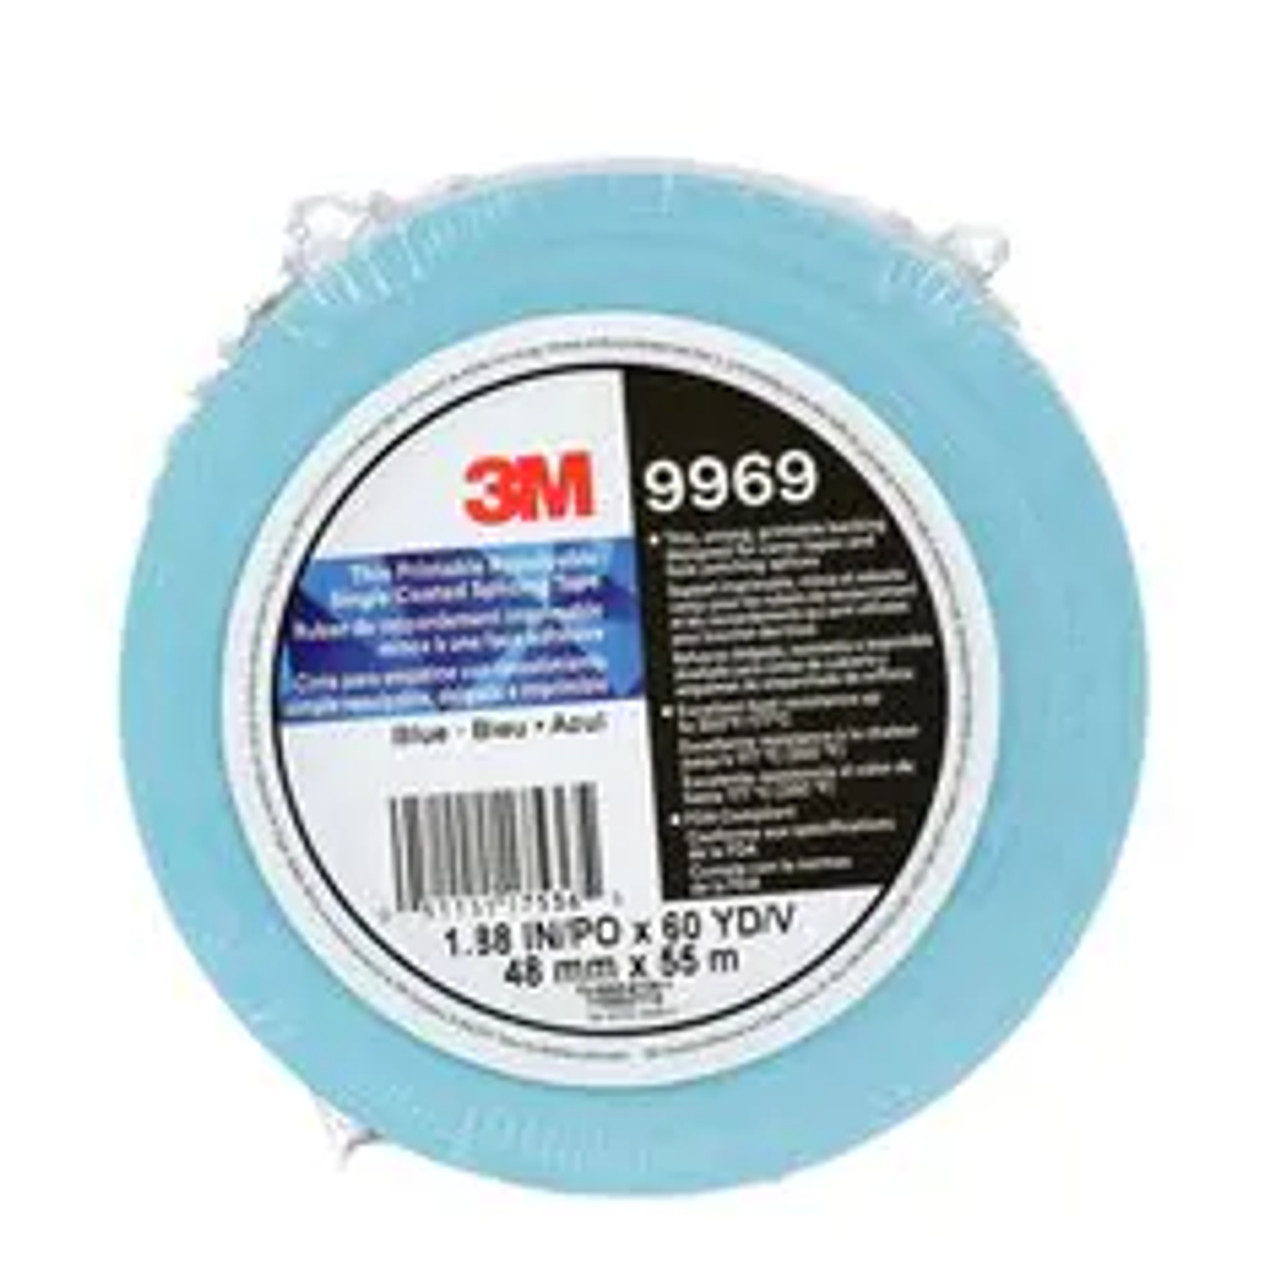 Repulpable Single Coated Splicing Tape 901